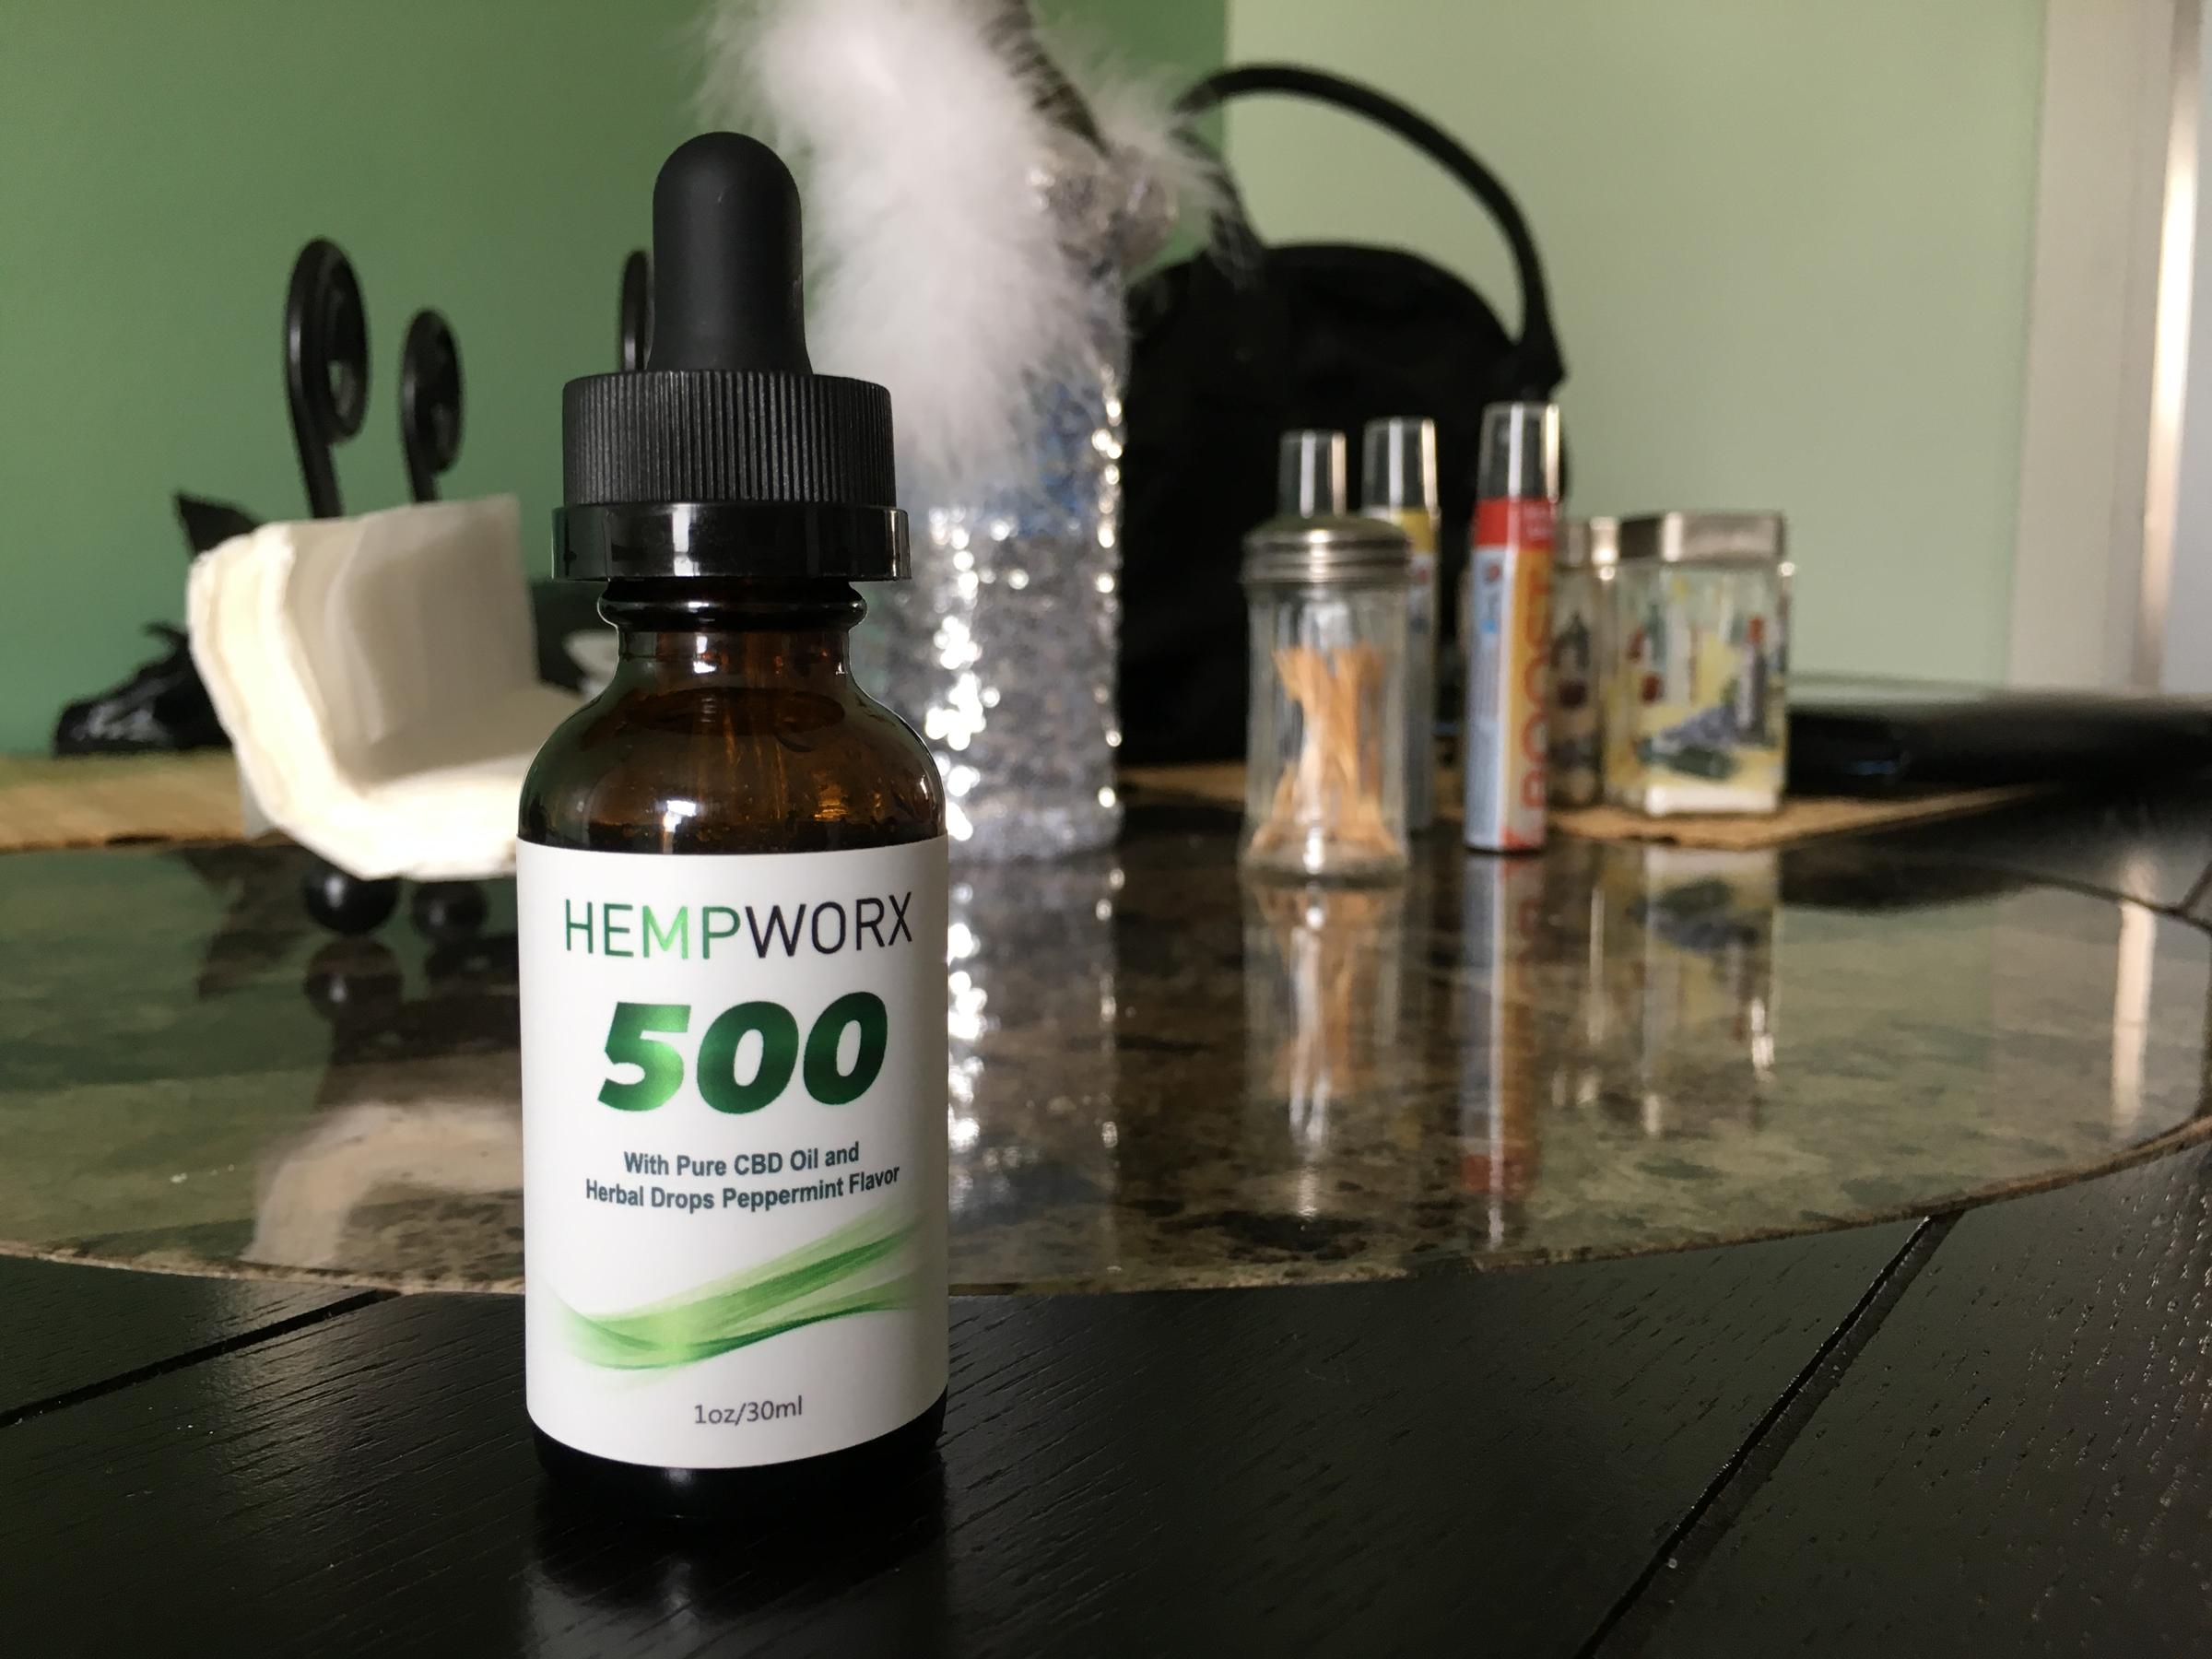 What To Do If I Bought Cbd Oil, But Didn’t Know It Was Illegal Idaho